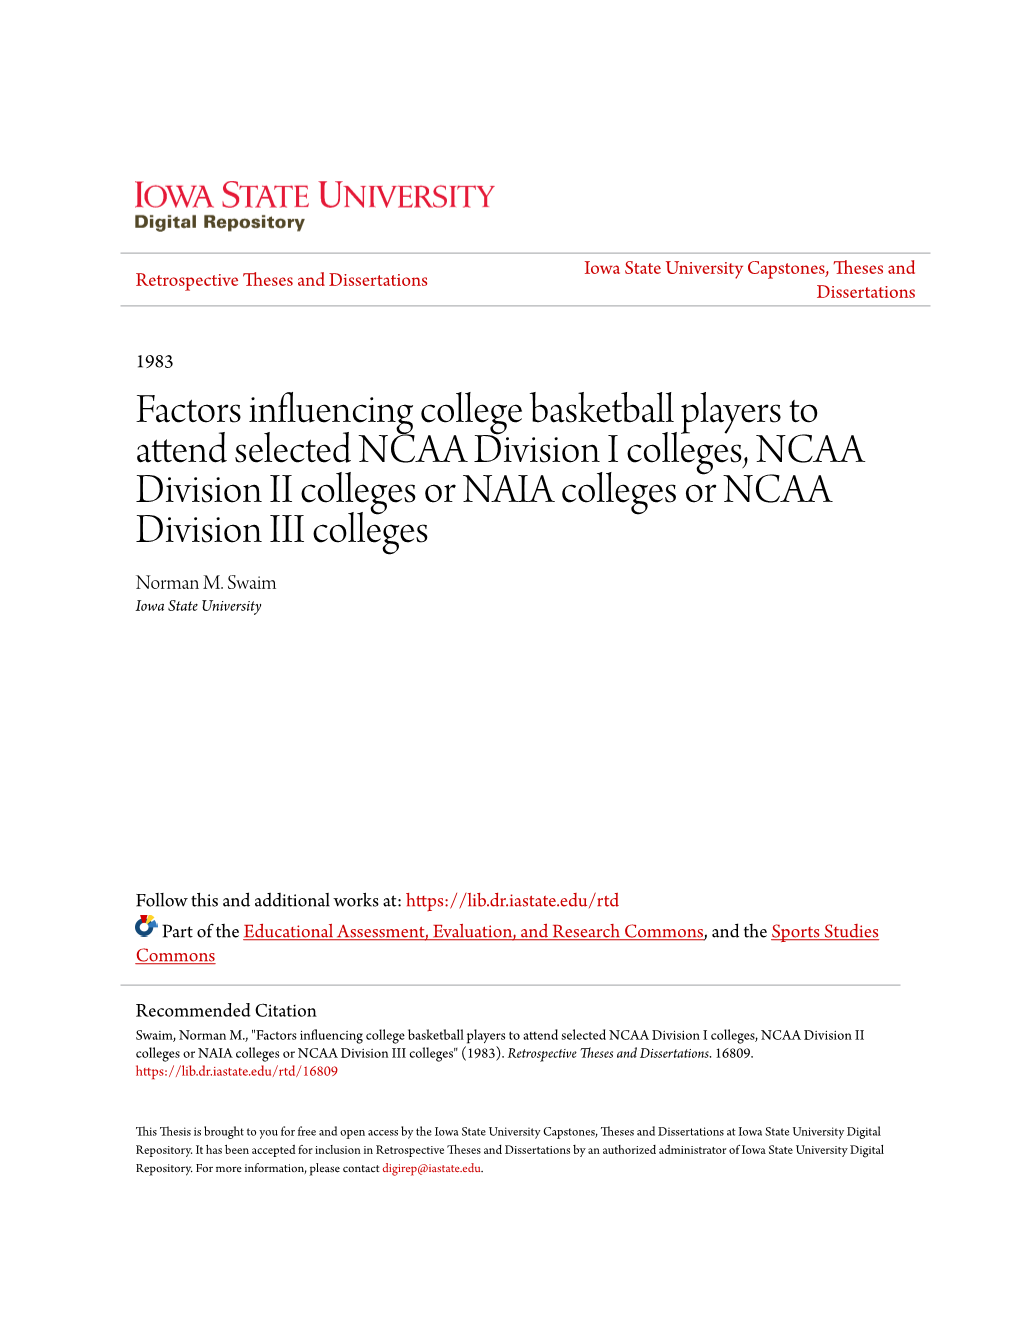 Factors Influencing College Basketball Players to Attend Selected NCAA